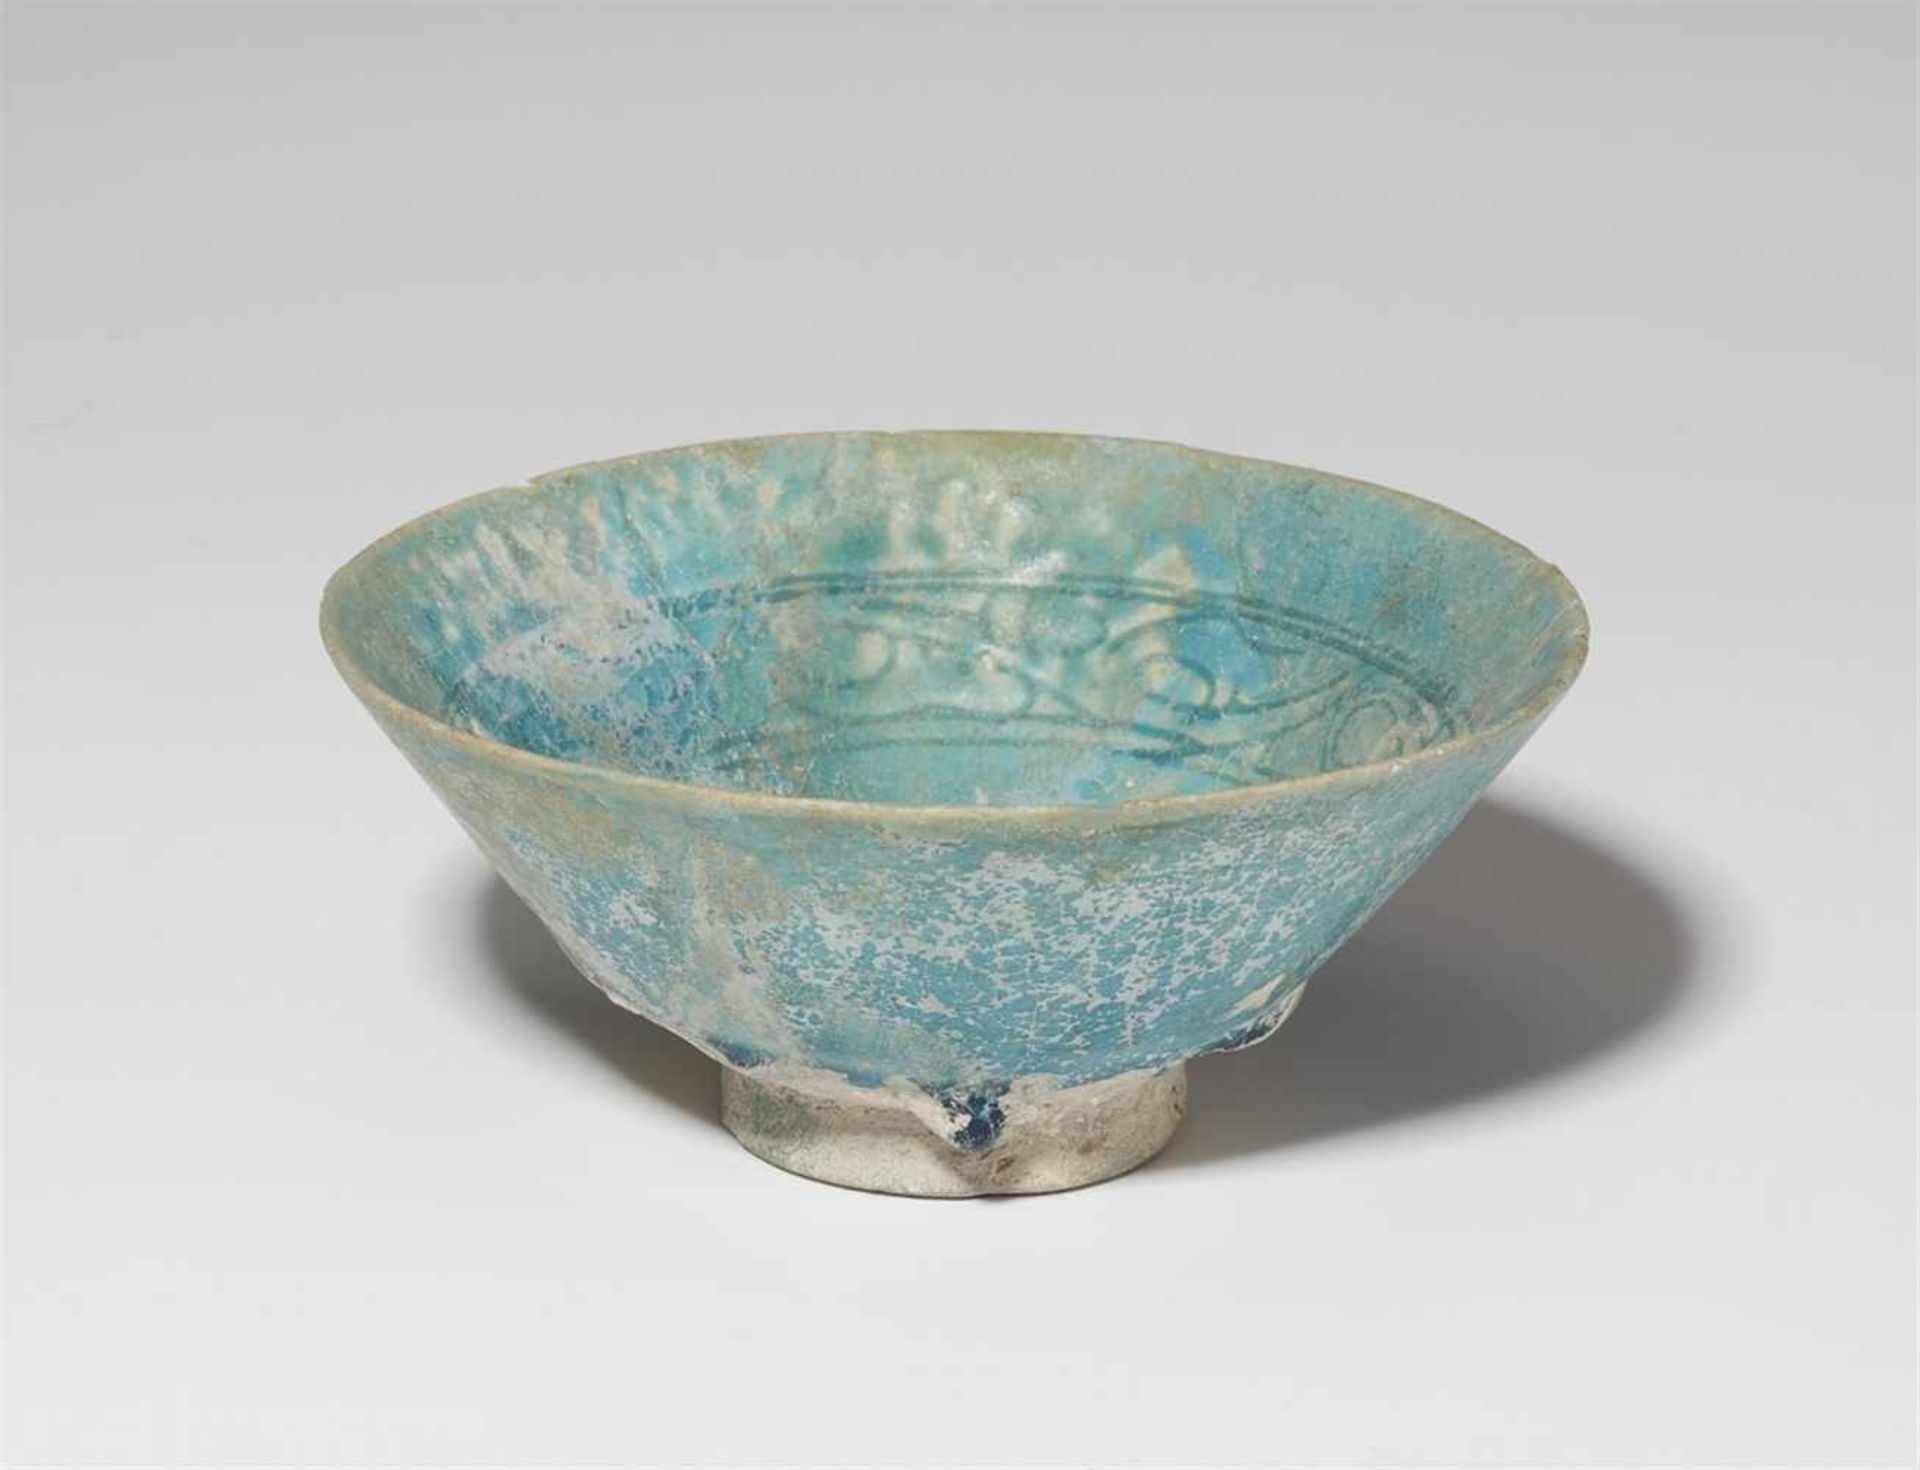 An Iranian engraved fritware bowlQuarz frit with iridescent turqoise glaze over a band of stylised